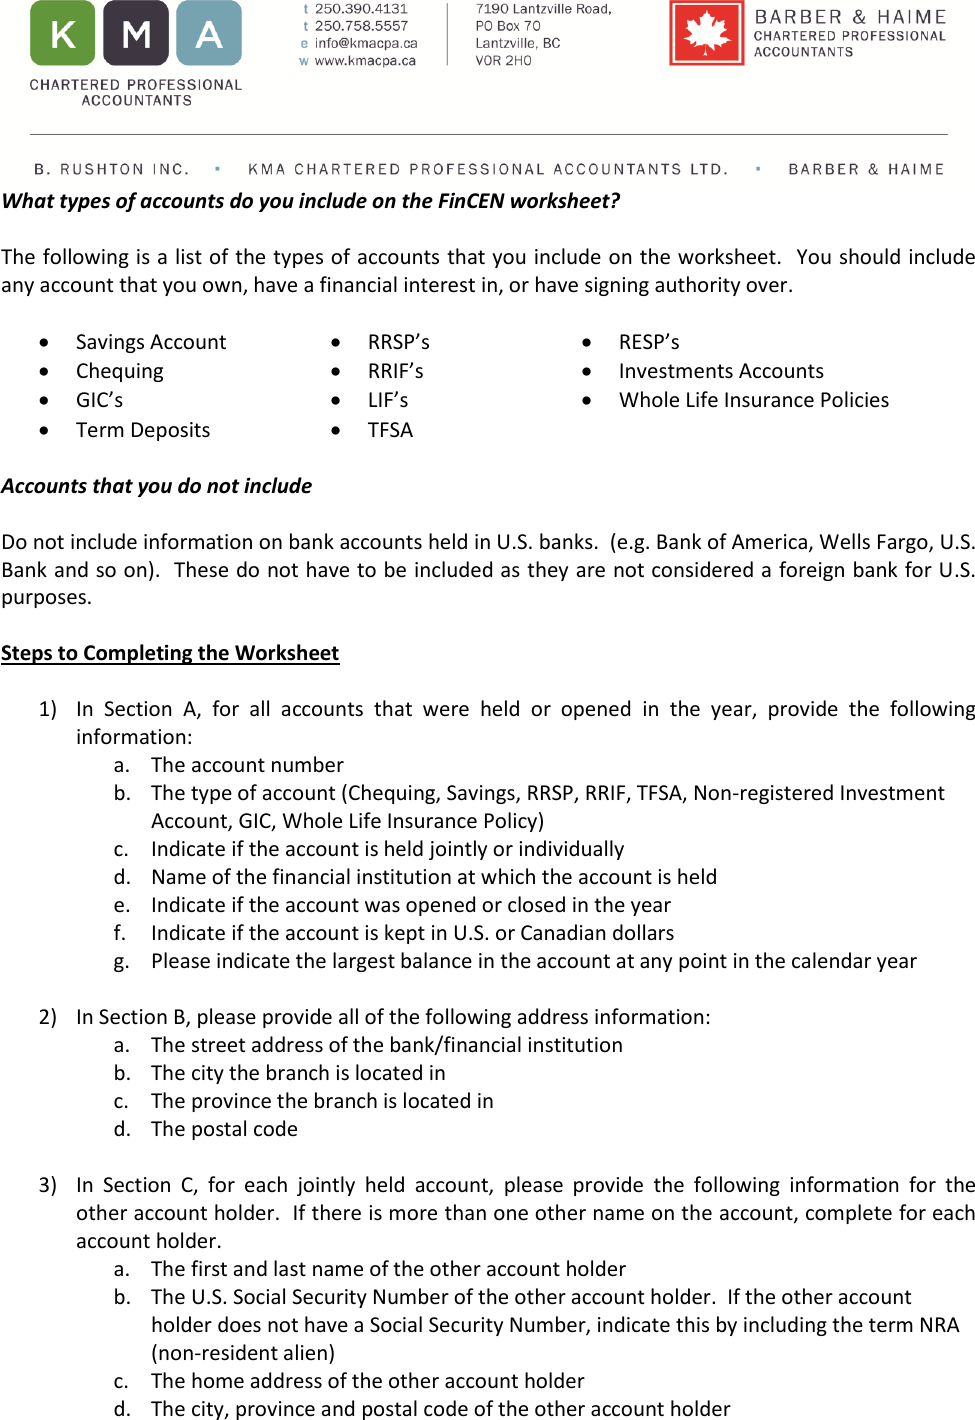 Page 2 of 3 - Instructions-for-completing-fincen-114-worksheet